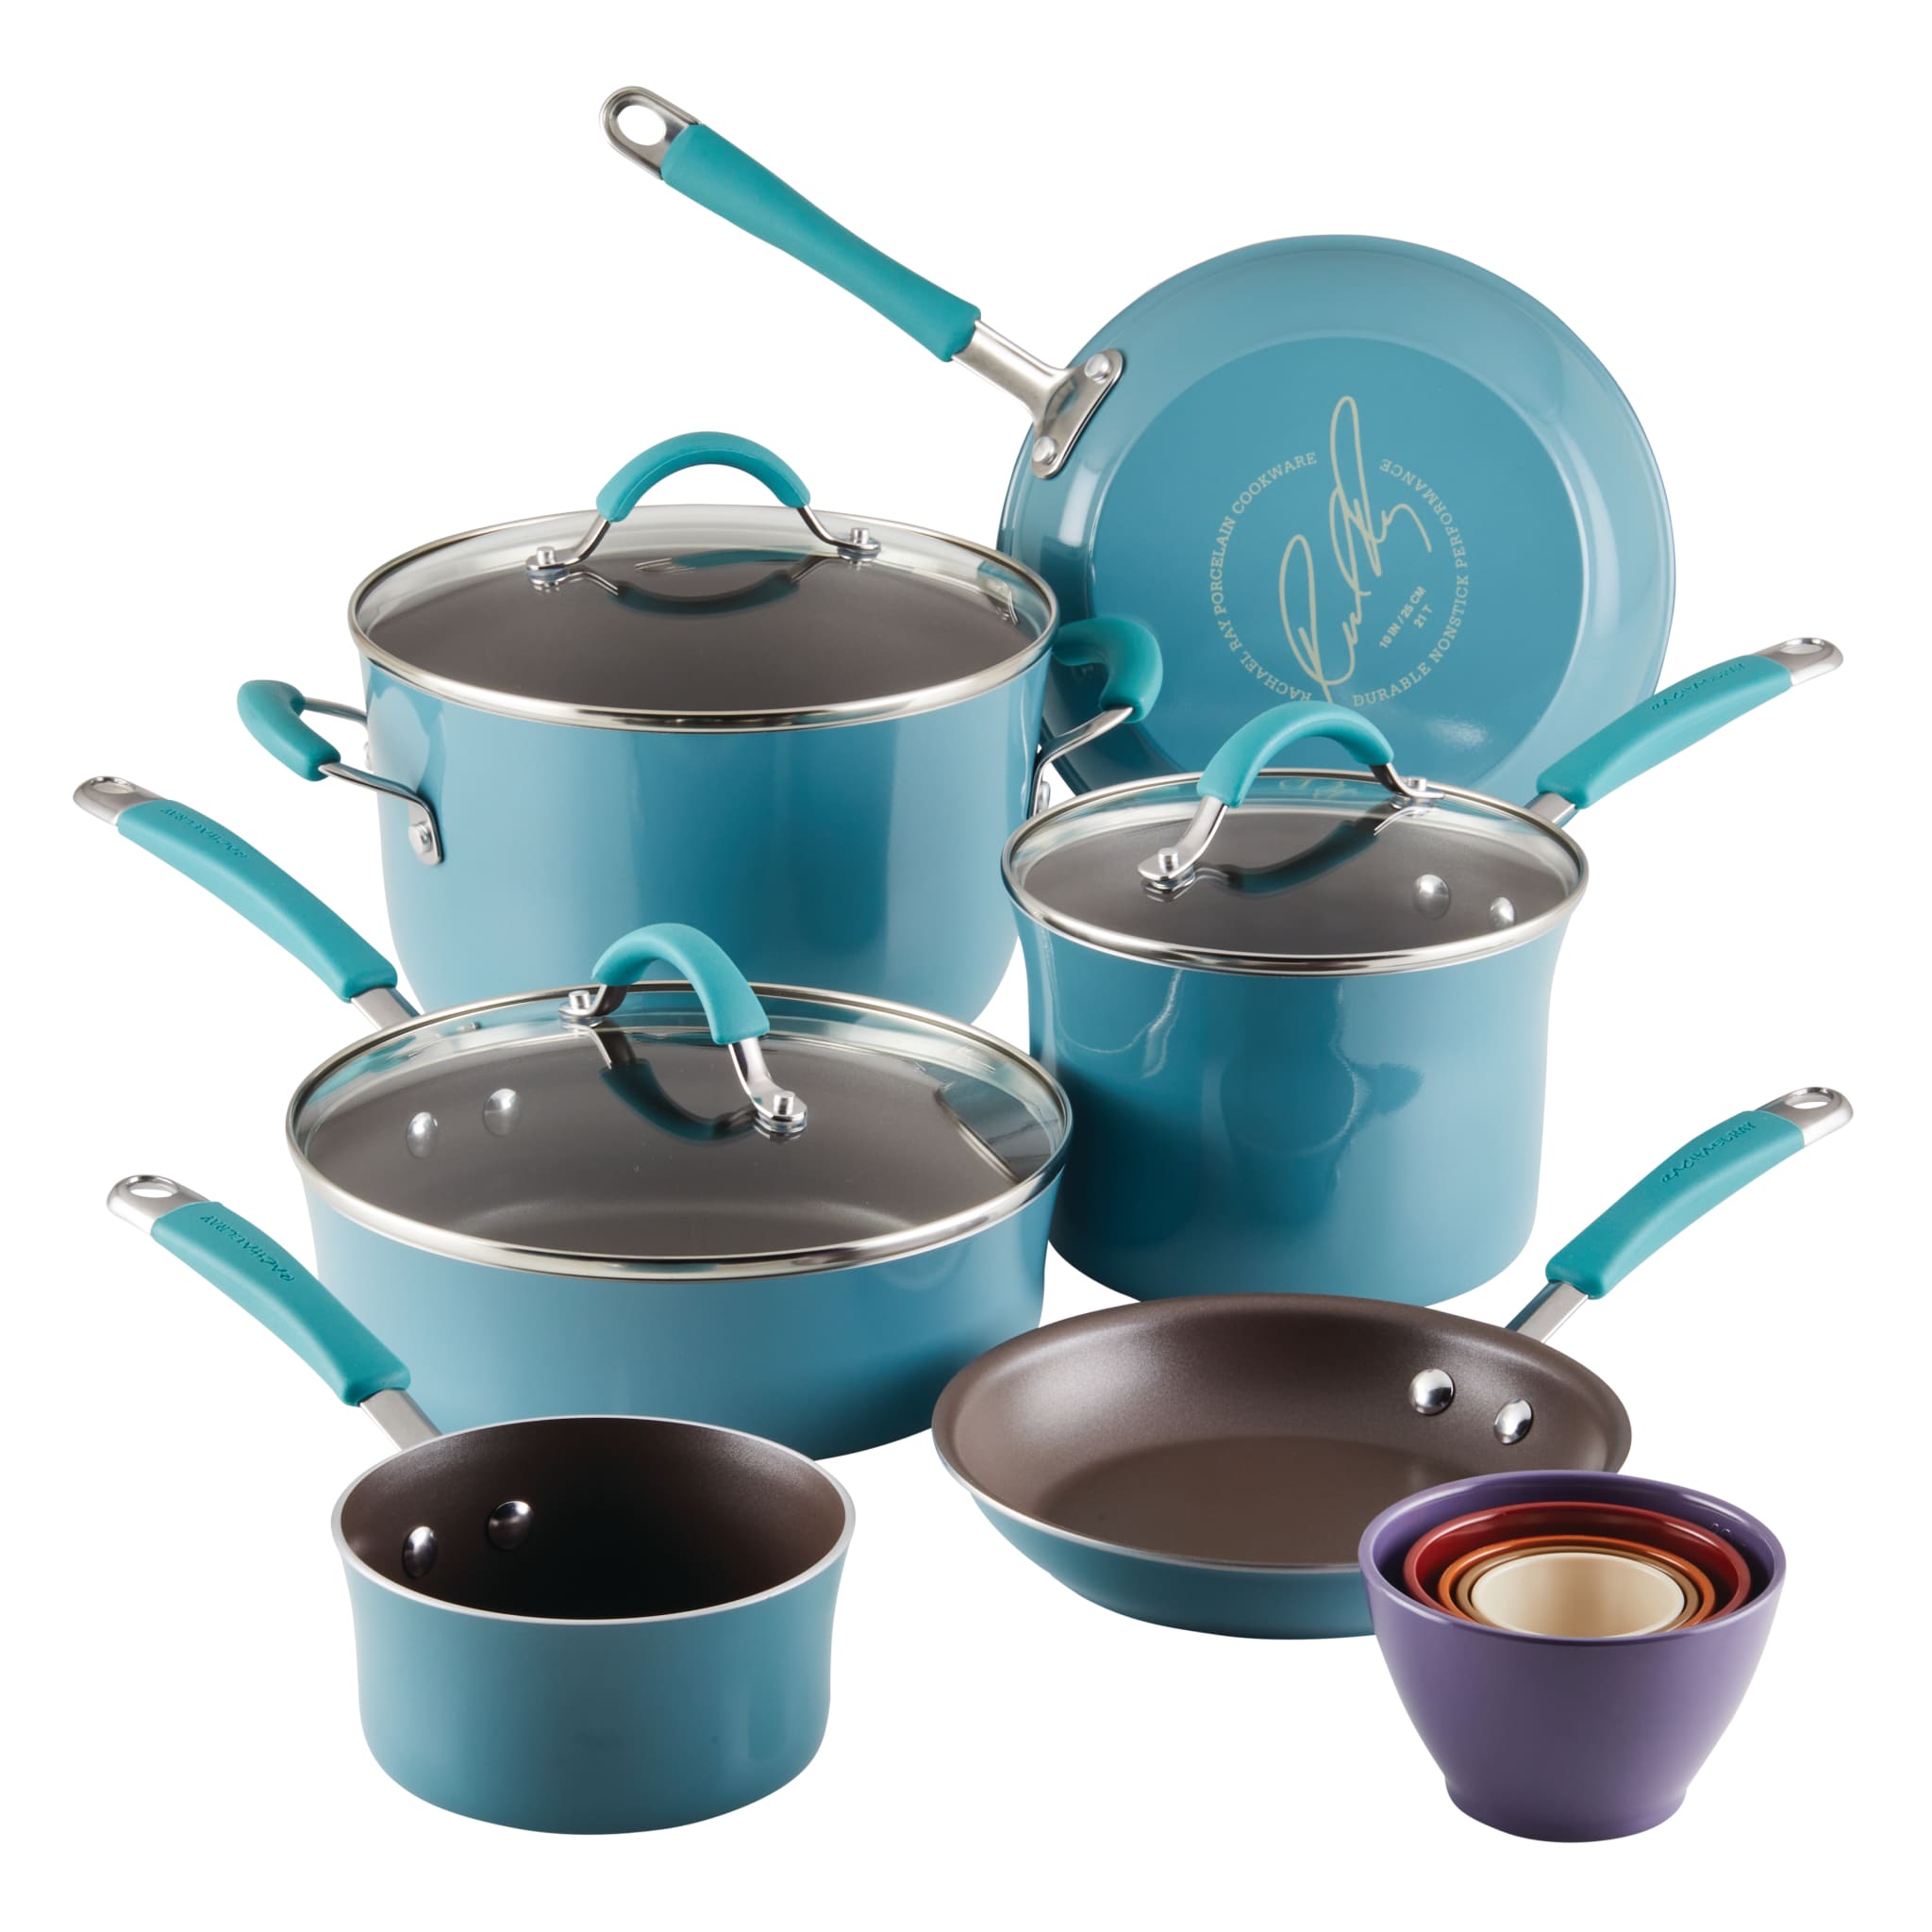 14 Pc Ceramic Induction-Ready Cookware Set Teal - Tramontina US